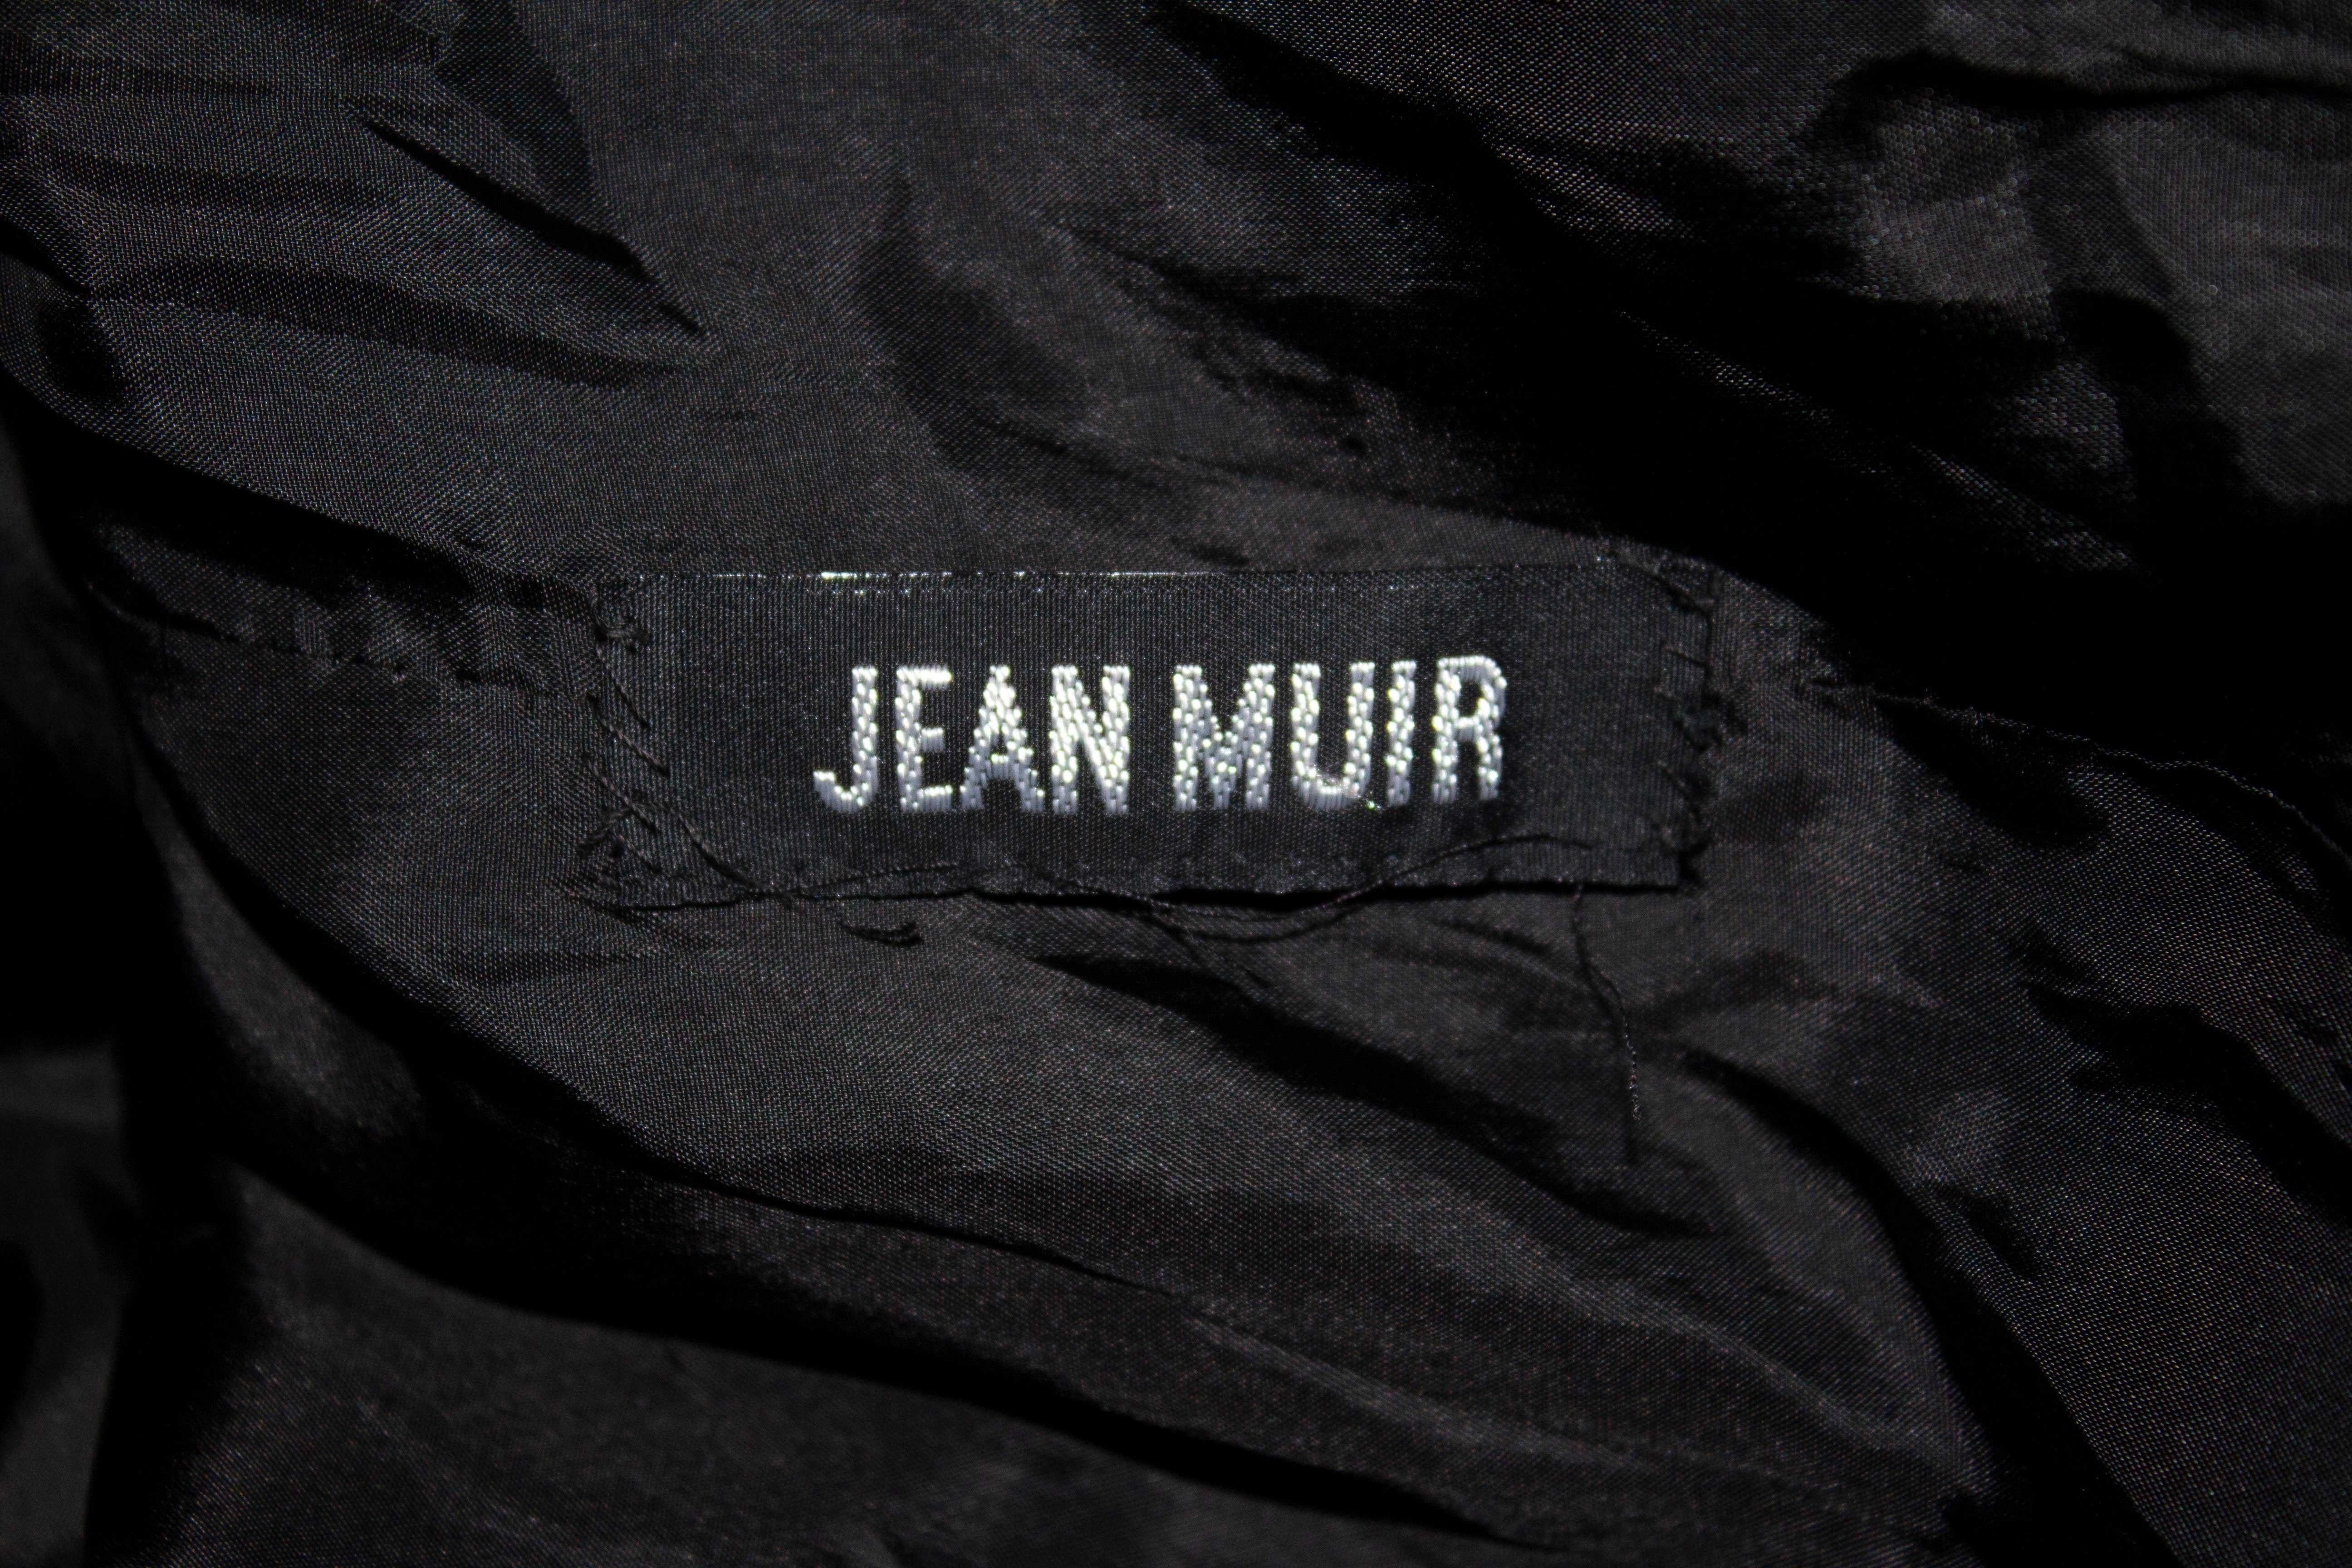 A charging vintage suede jacket by Jean Muir ( main line), ideal for Spring /Summer.
In a black, super soft suede the jacket has a decorative trim on the collar and cuffs, front button opening, 5'' vent at the back and small original shoulder pads. 